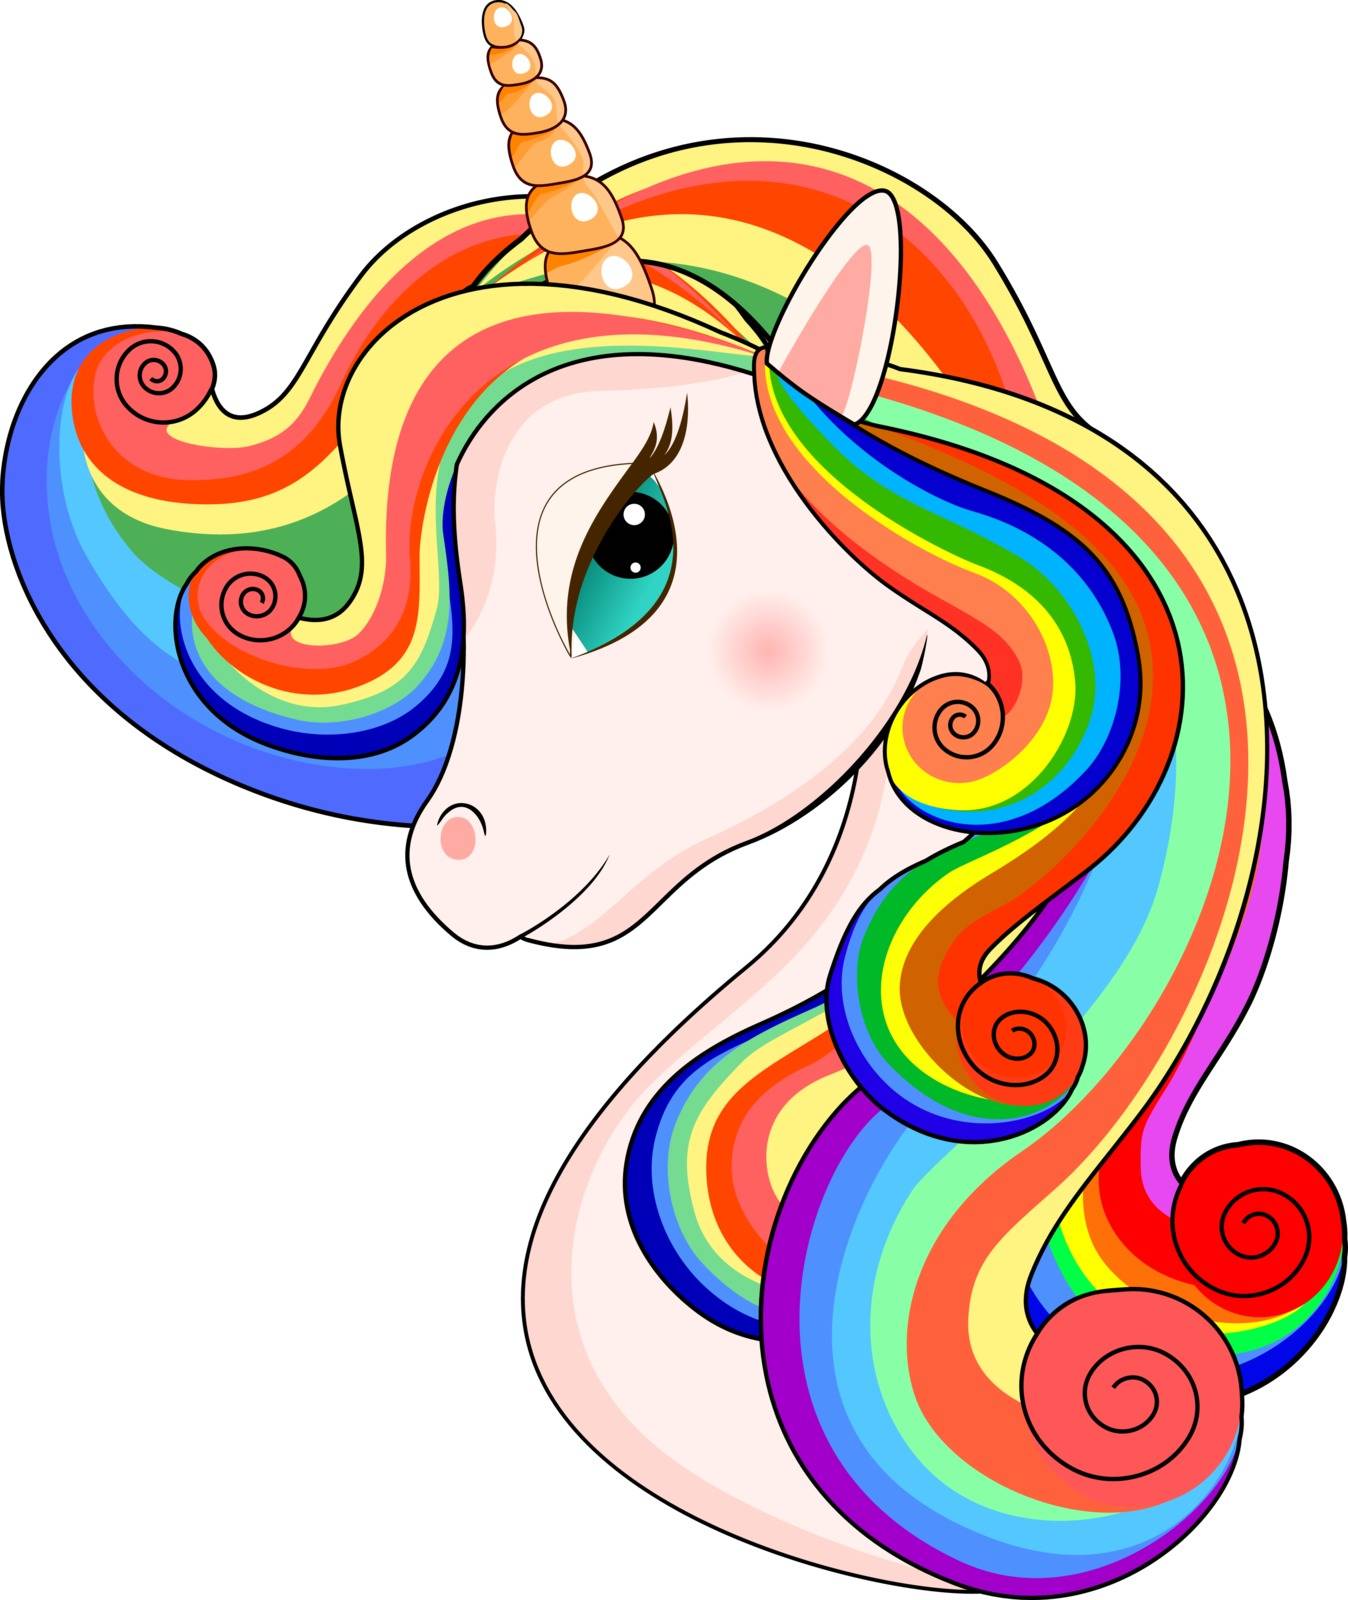 Head of a unicorn with a multi-colored mane on a white background.